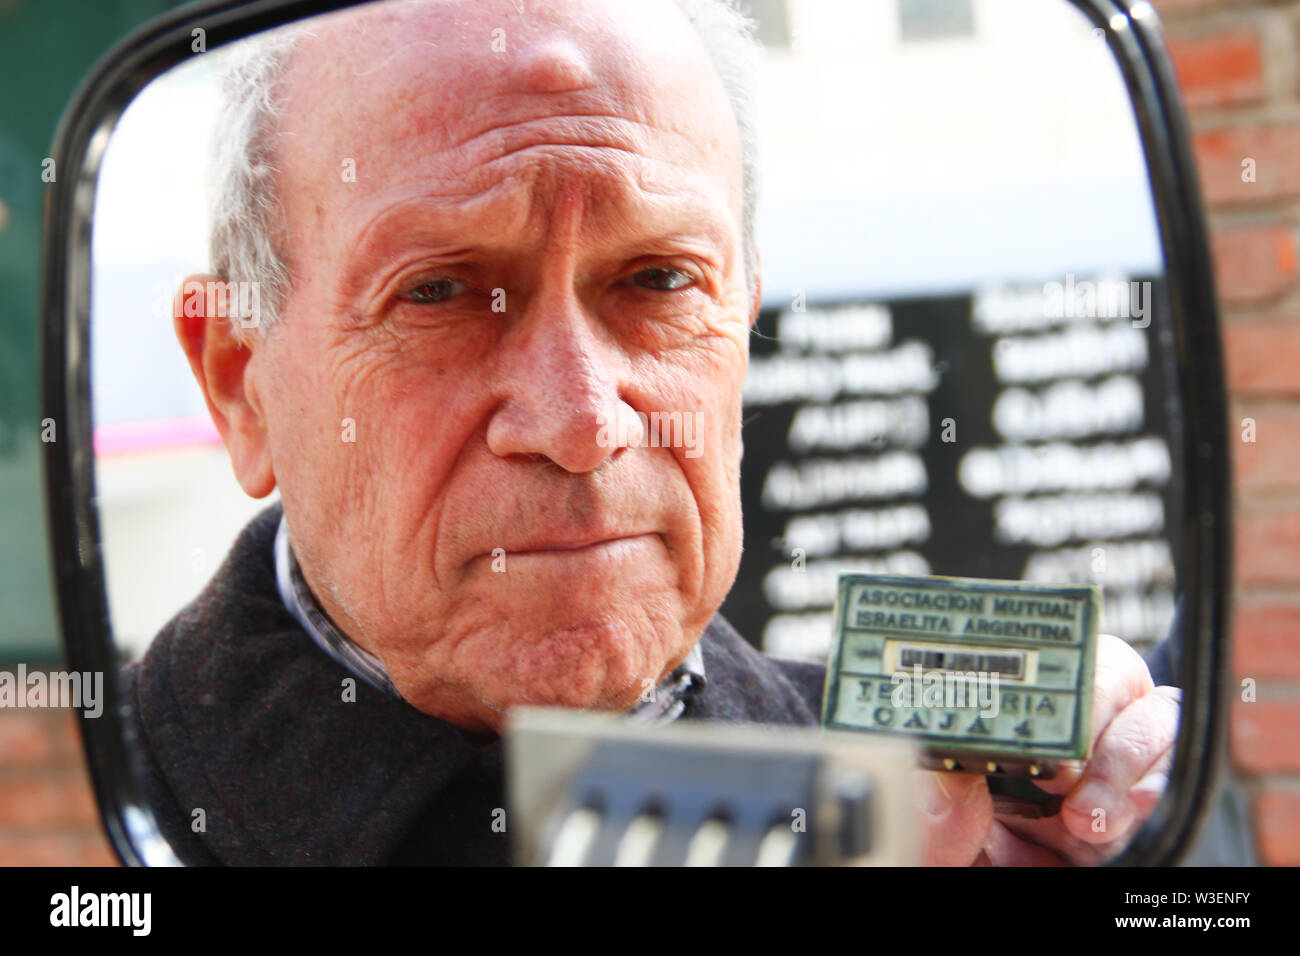 BUENOS AIRES, 14.07.2019: Jorge Beremblum, survivor of the car bomb attack on the AMIA headquarters on July 18, 1994 in front of the new building and Stock Photo